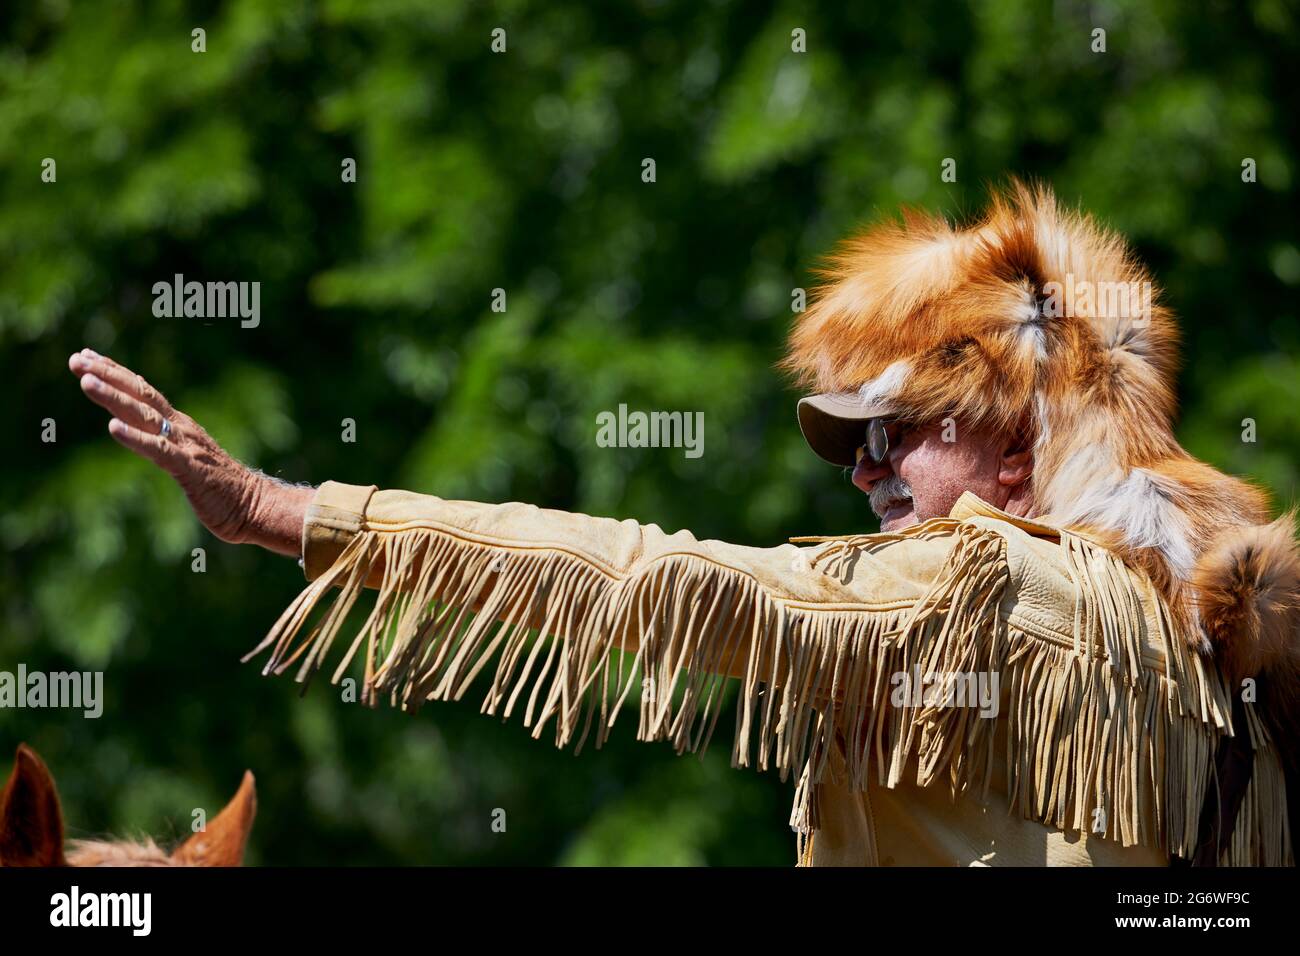 Prescott, Arizona, USA - July 3, 2021: Close up of a Mountain Man waving wearing a fur hat while riding a horse in 4th of July parade Stock Photo